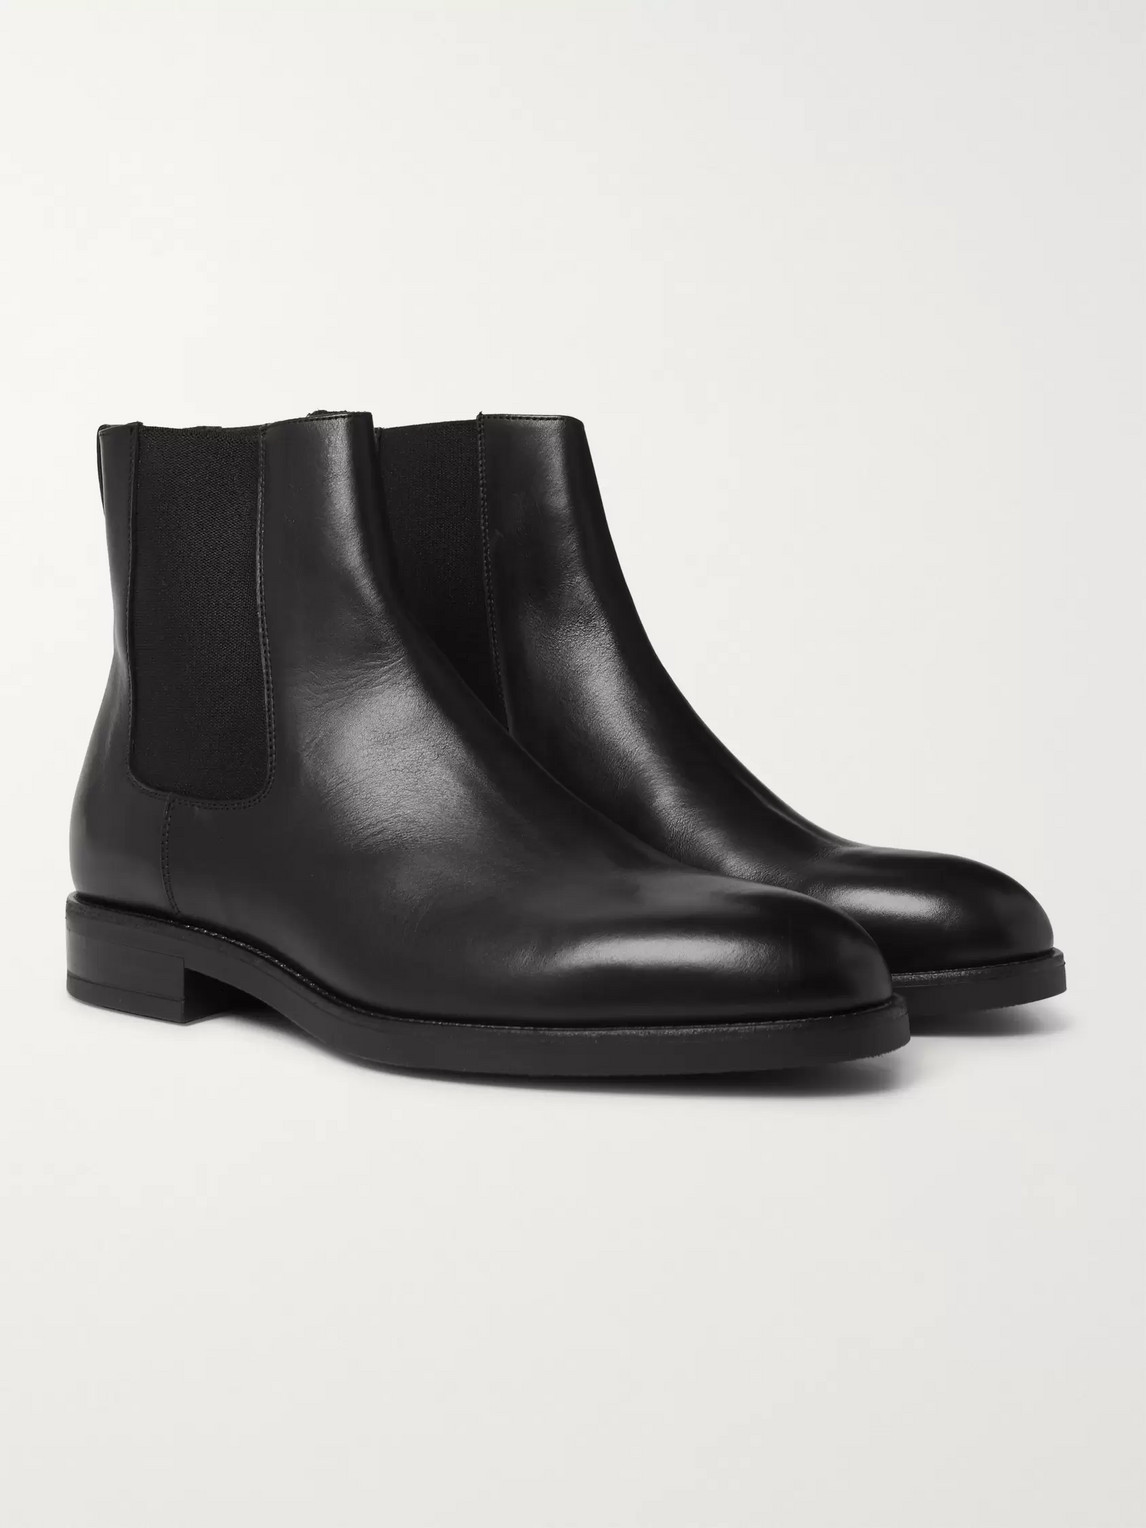 PAUL SMITH CANON LEATHER CHELSEA BOOTS